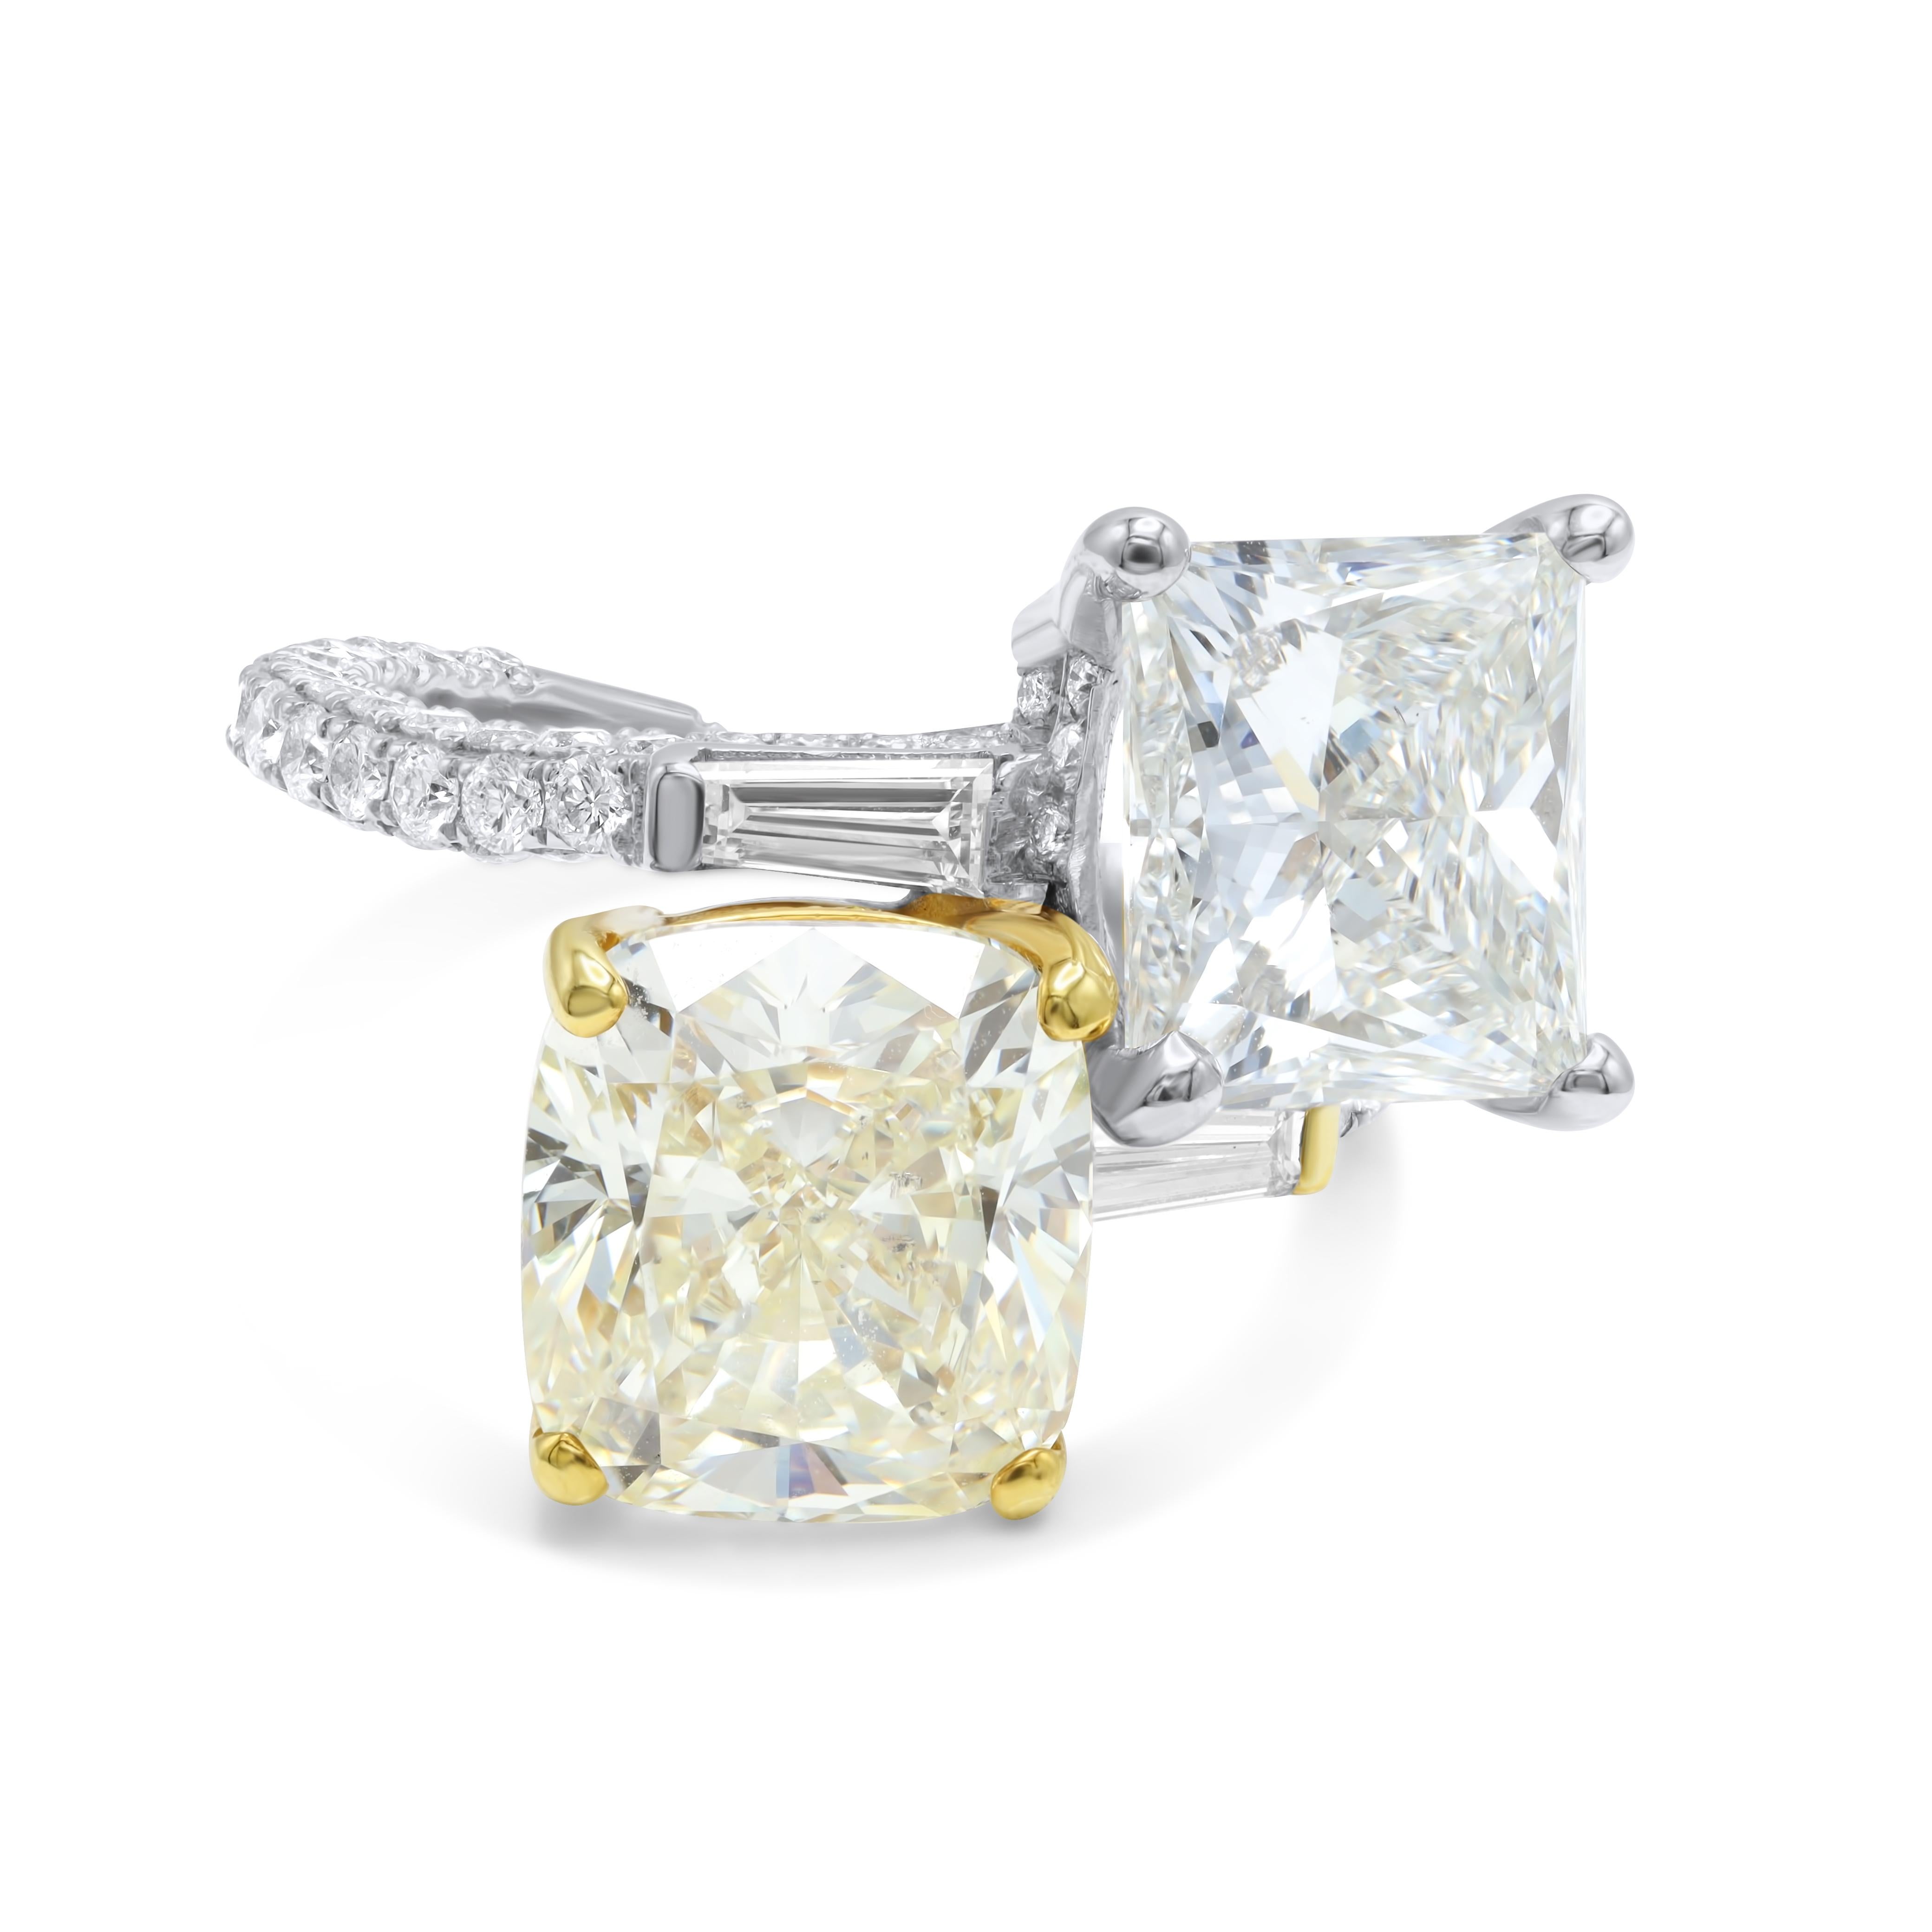 Modern Diana M. Princess Cut 4.01ct I SI1 and 5.24ct Yellow Diamond Cocktail Ring  For Sale